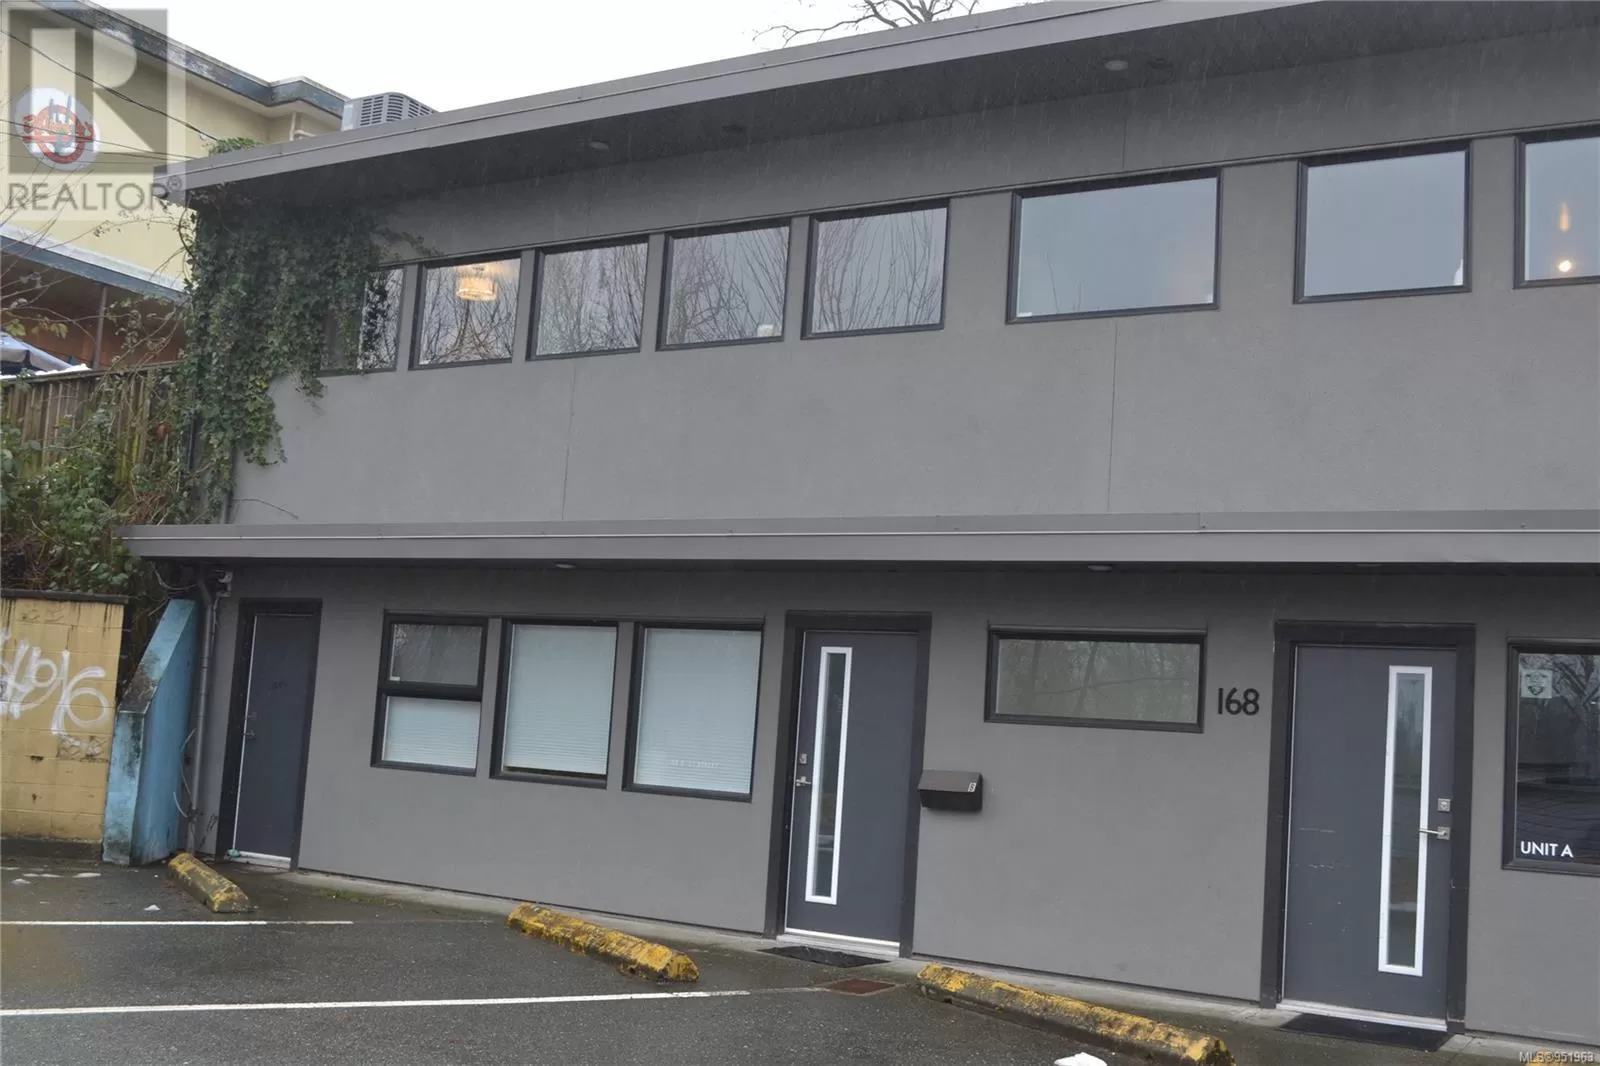 Retail for rent: B 168 5th Ave, Courtenay, British Columbia V9N 1J4